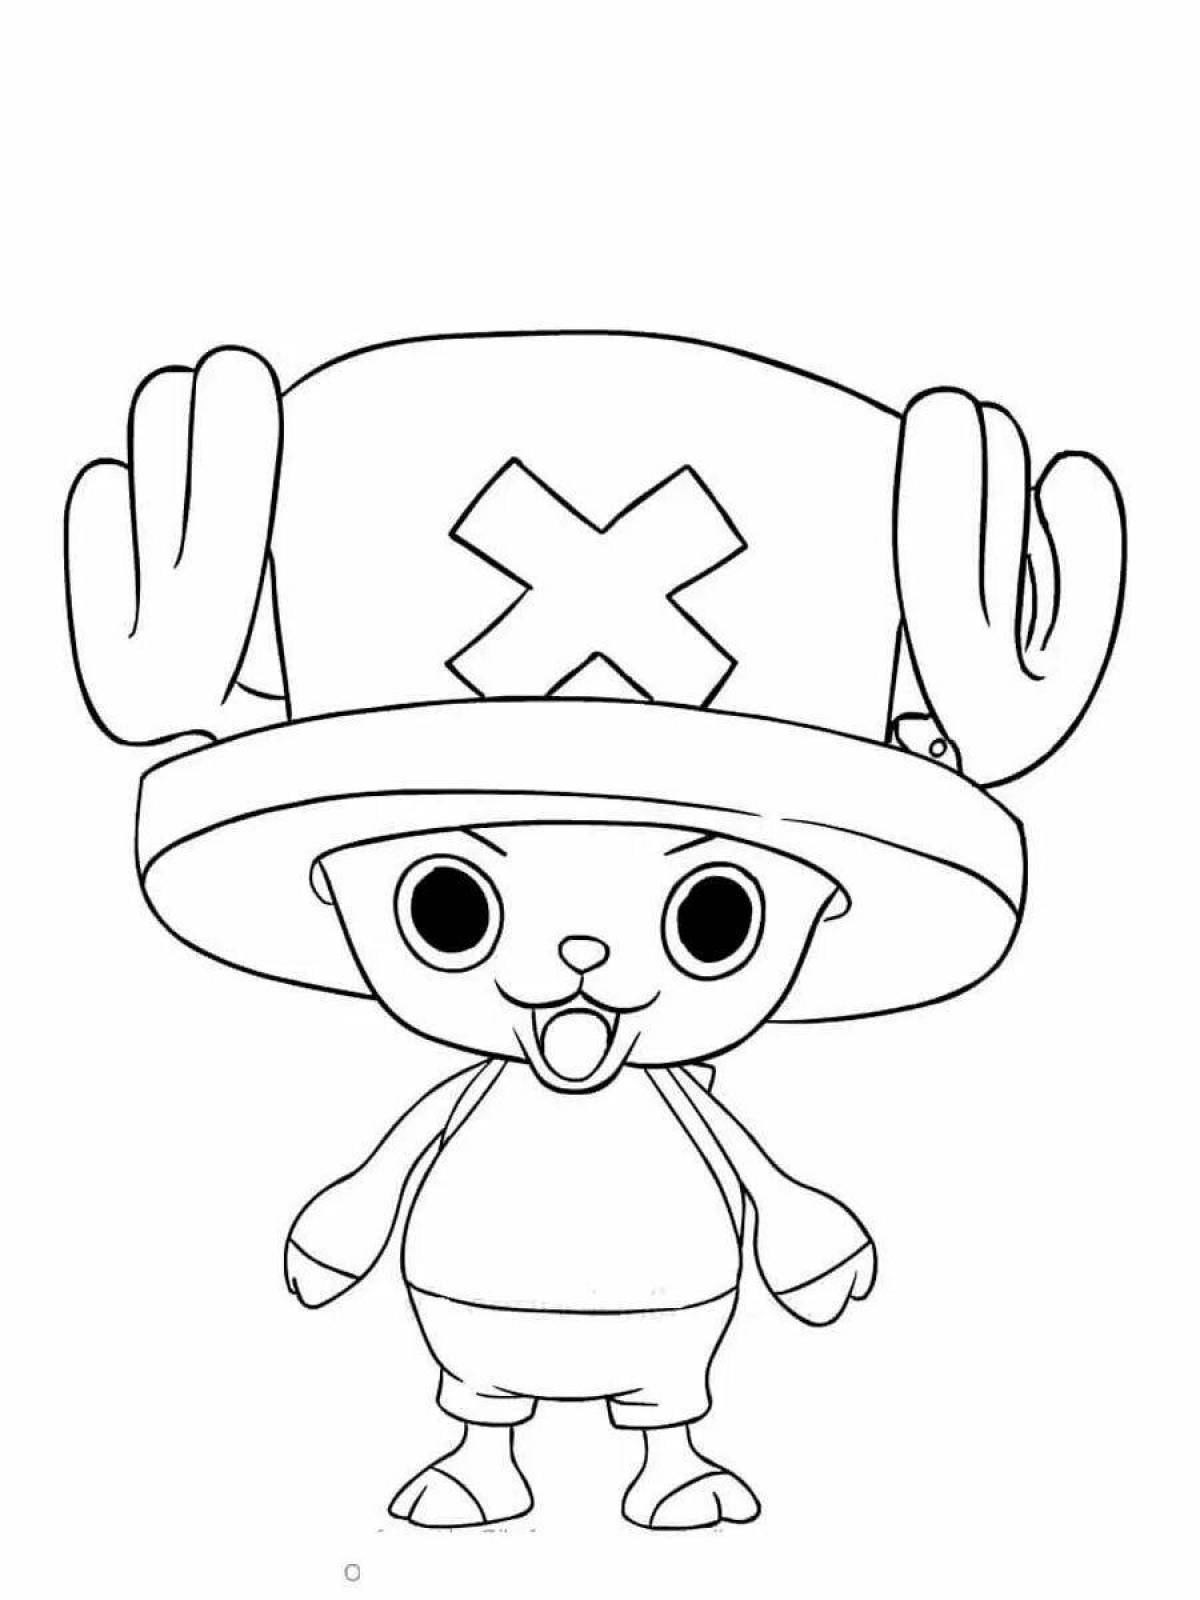 One piece live coloring page